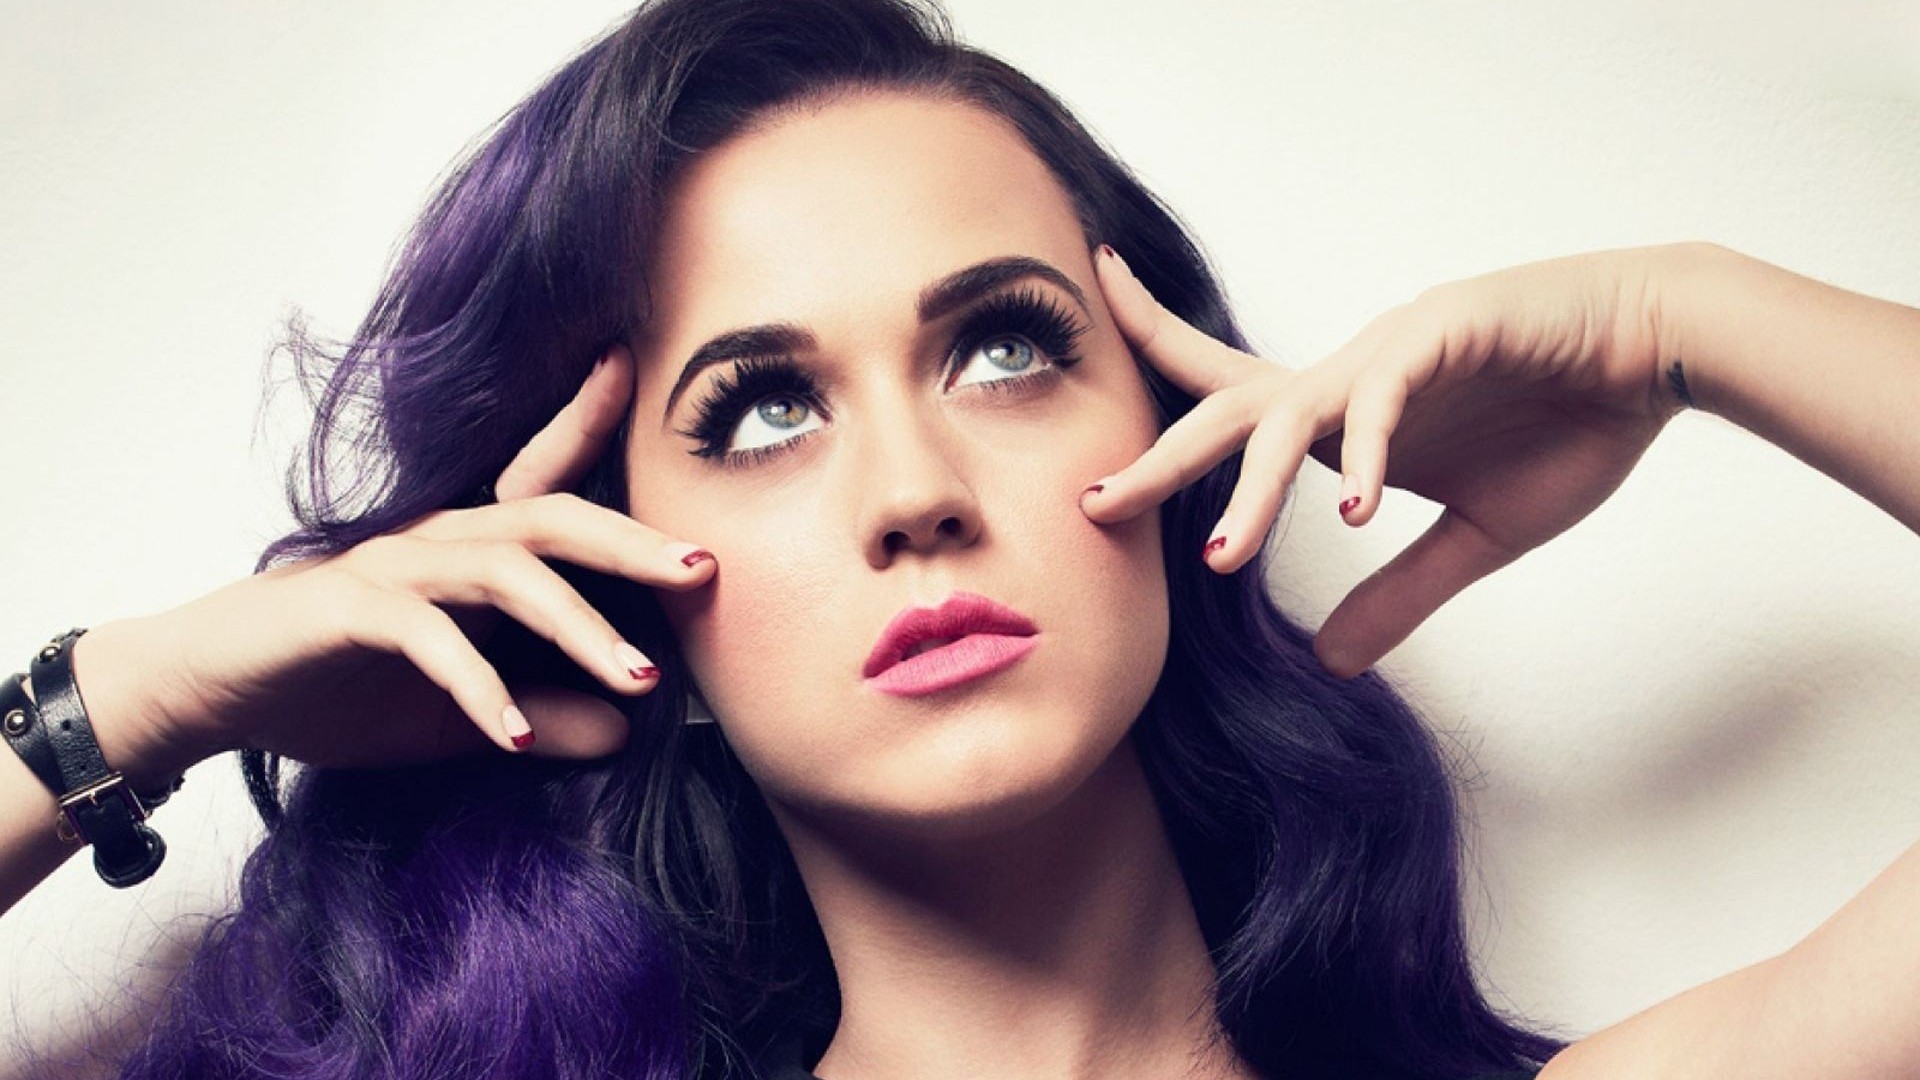 Katy Perry HD Wallpaper High Definition Quality Widescreen